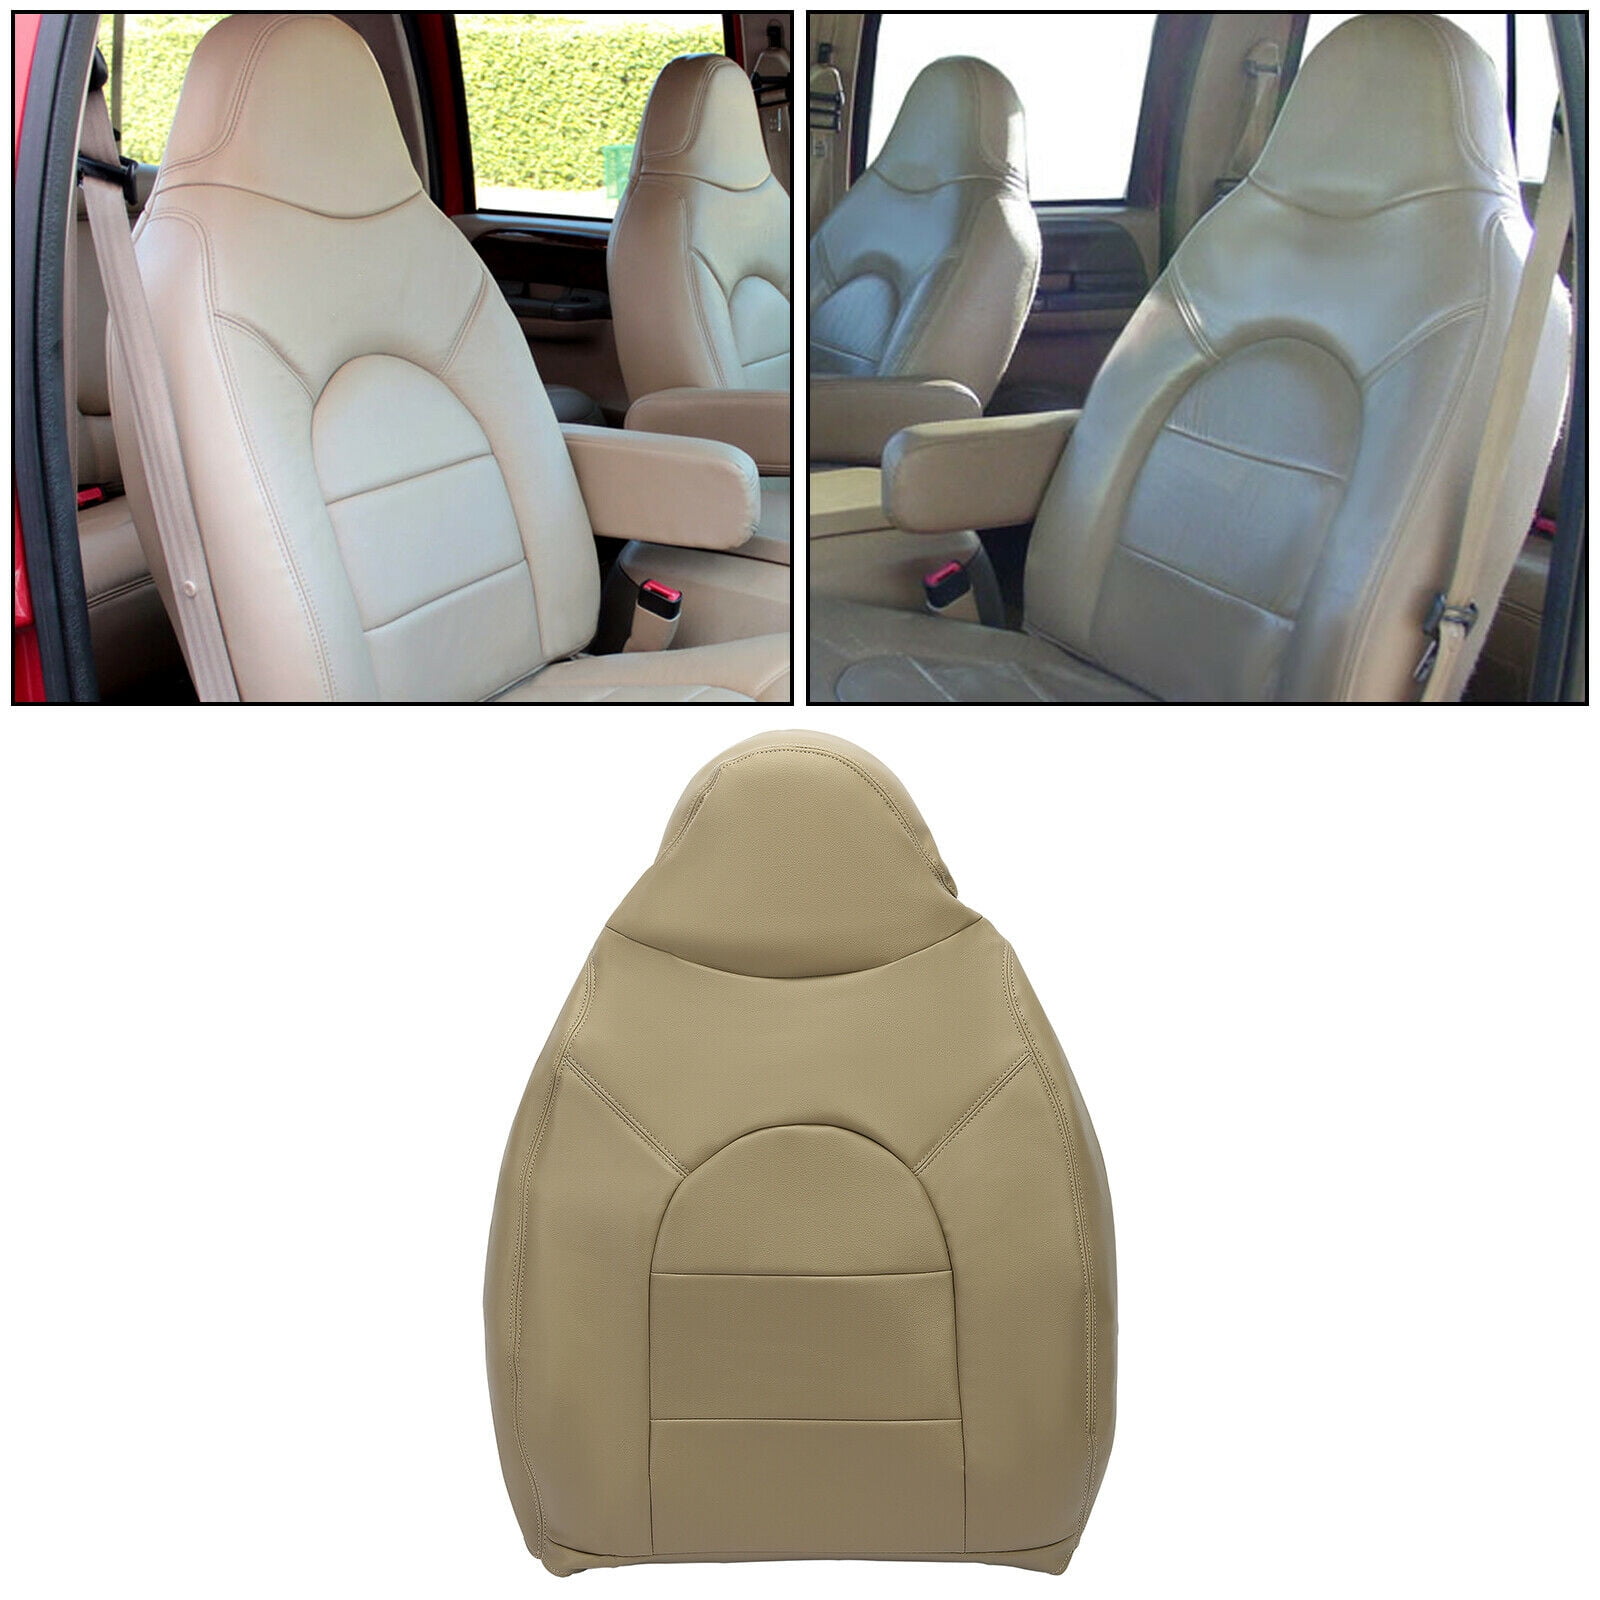 COMPLETE DRIVER Leather Seat Covers TAN 2000 Ford F250 4x4 Lariat Diesel LIFTED